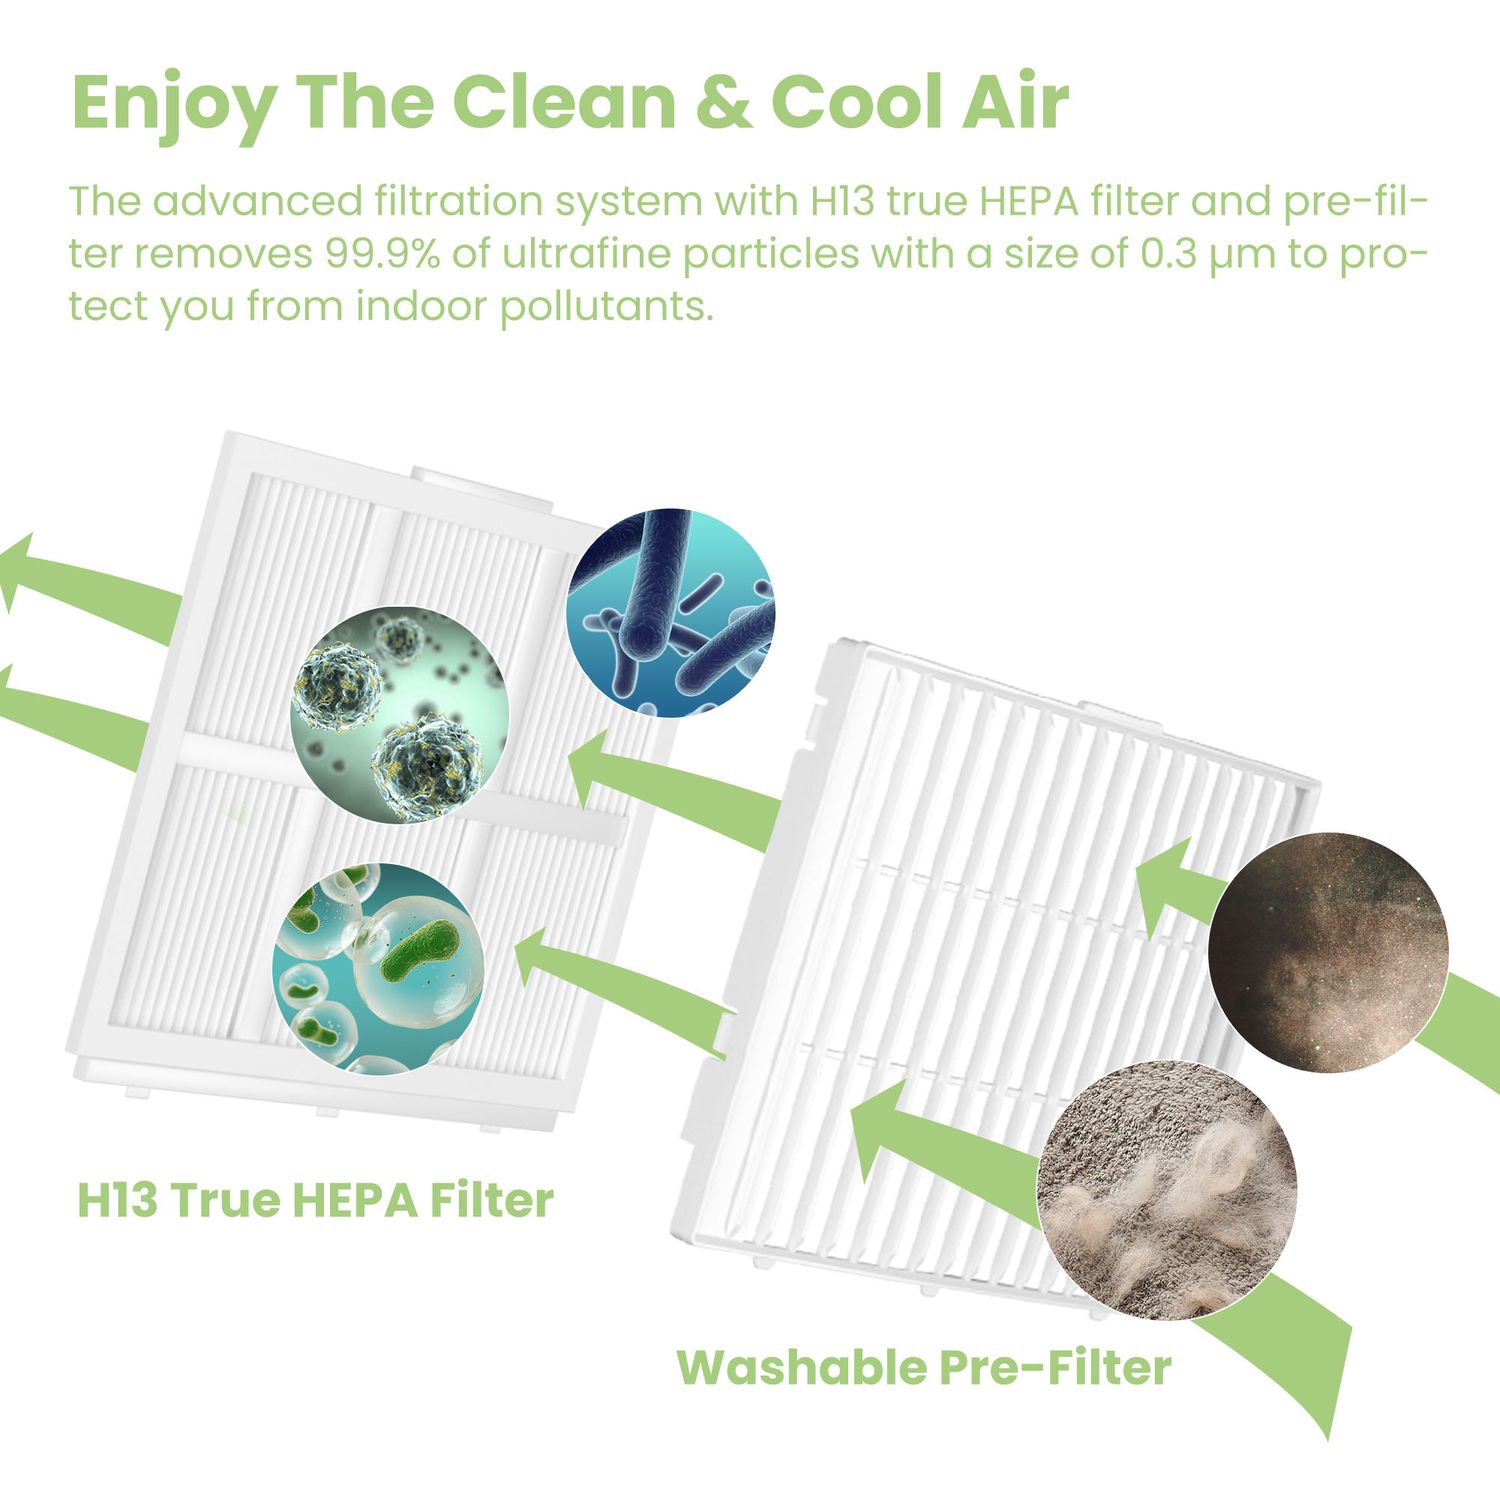 DUO air filtration system